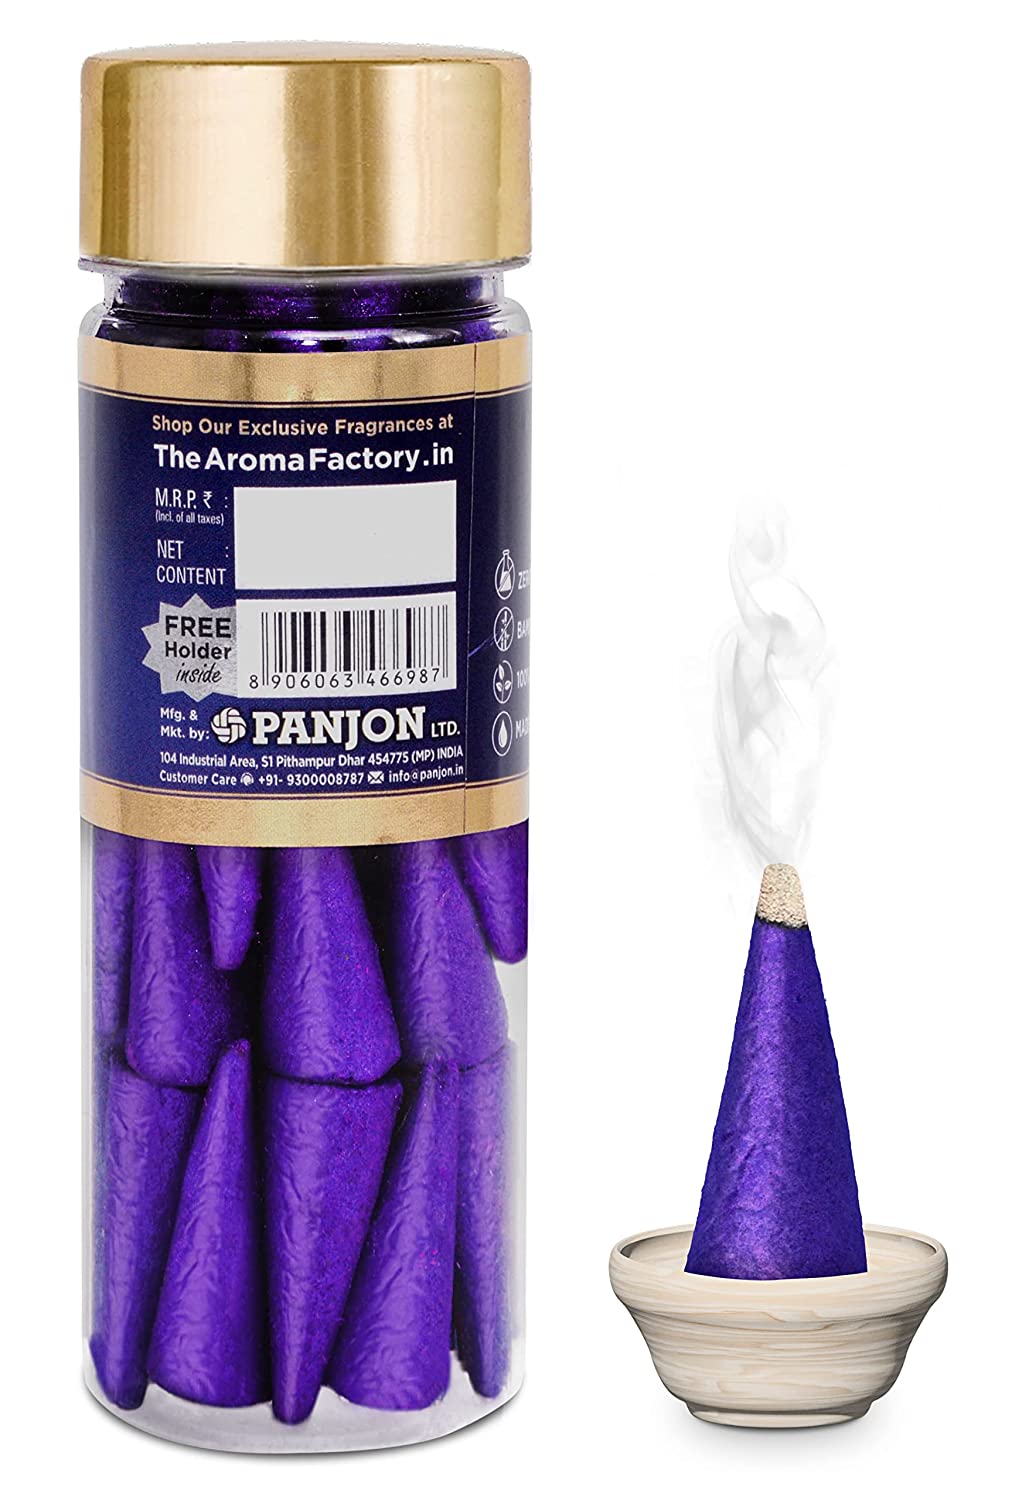 The Aroma Factory Incense Dhoop Cone for Pooja, Lavender (100% Herbal & 0% Charcoal) 1 Bottle x 30 Cones